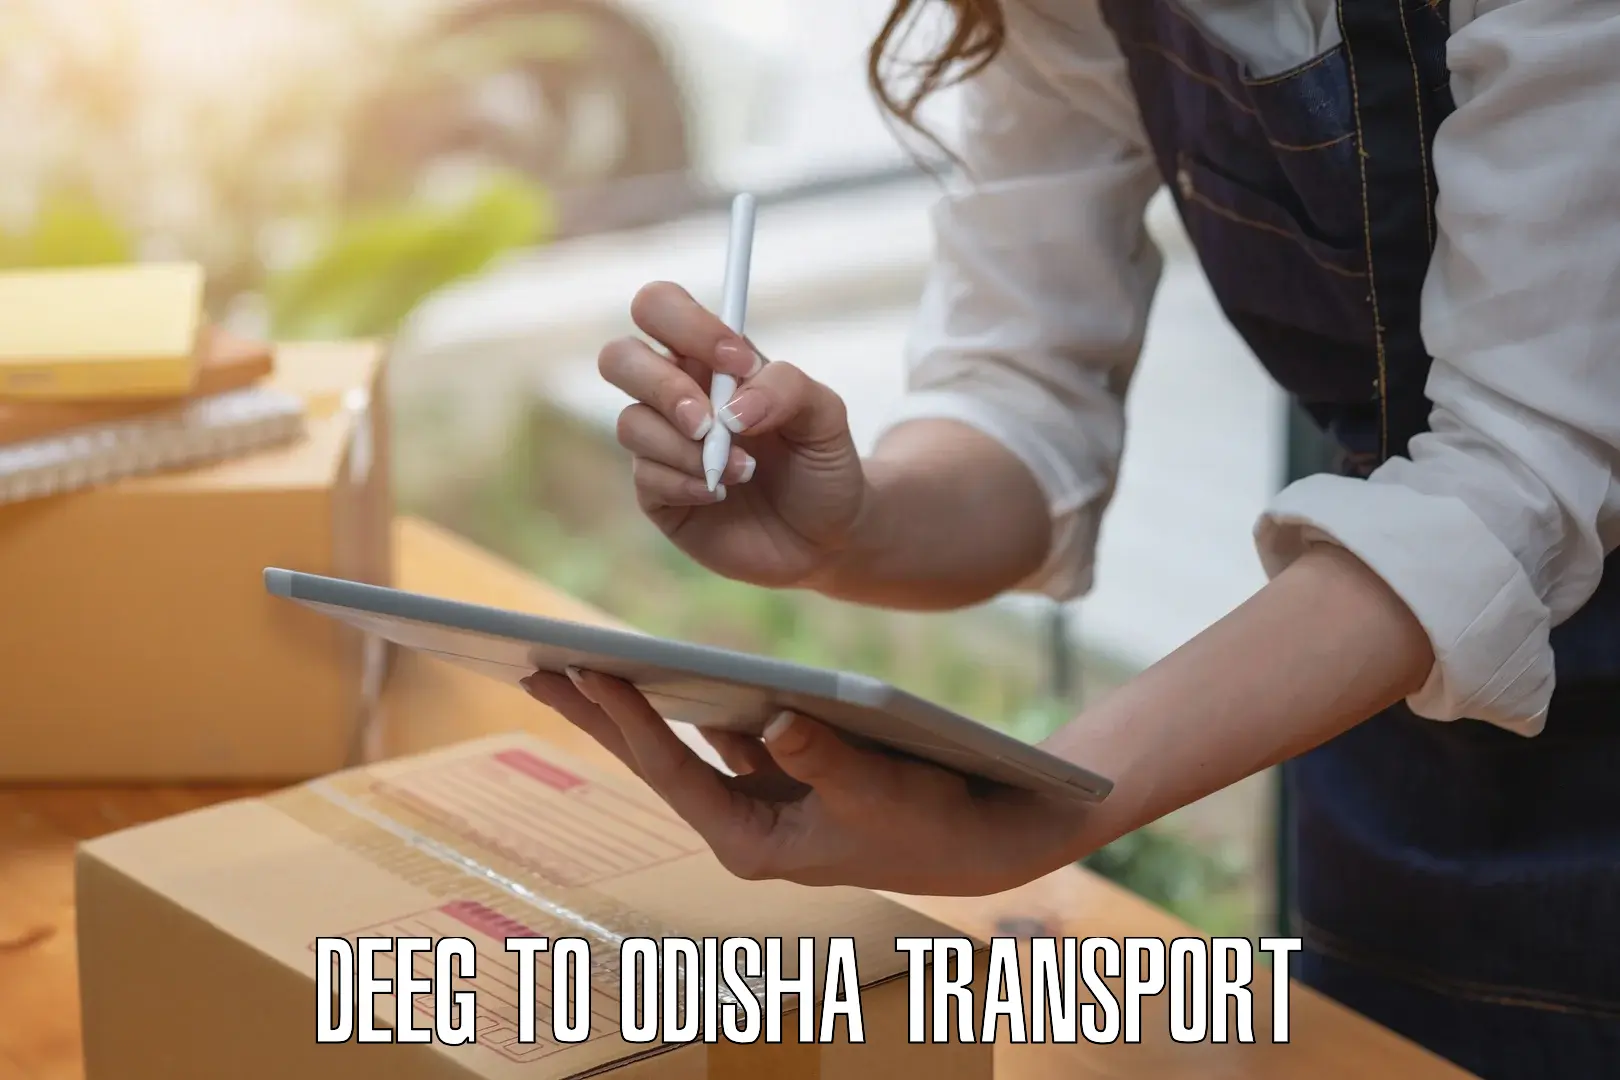 Road transport online services Deeg to Asika